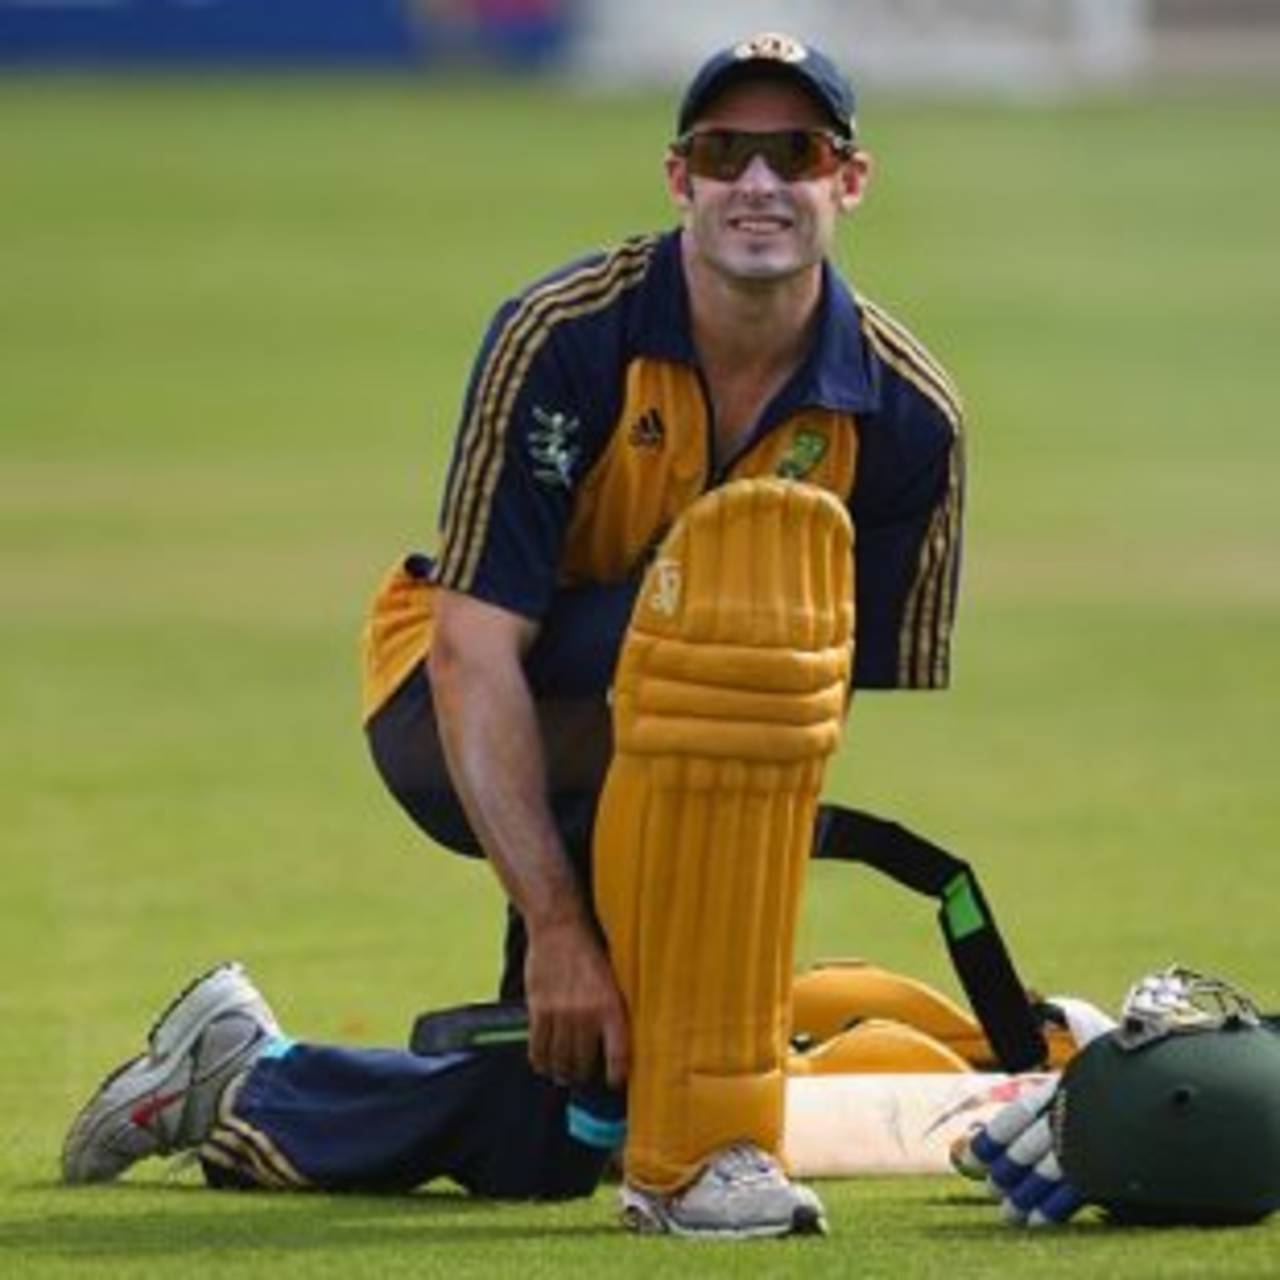 Michael Hussey pads up for a net session ahead of the second ODI against England, Lord's, September 5, 2009